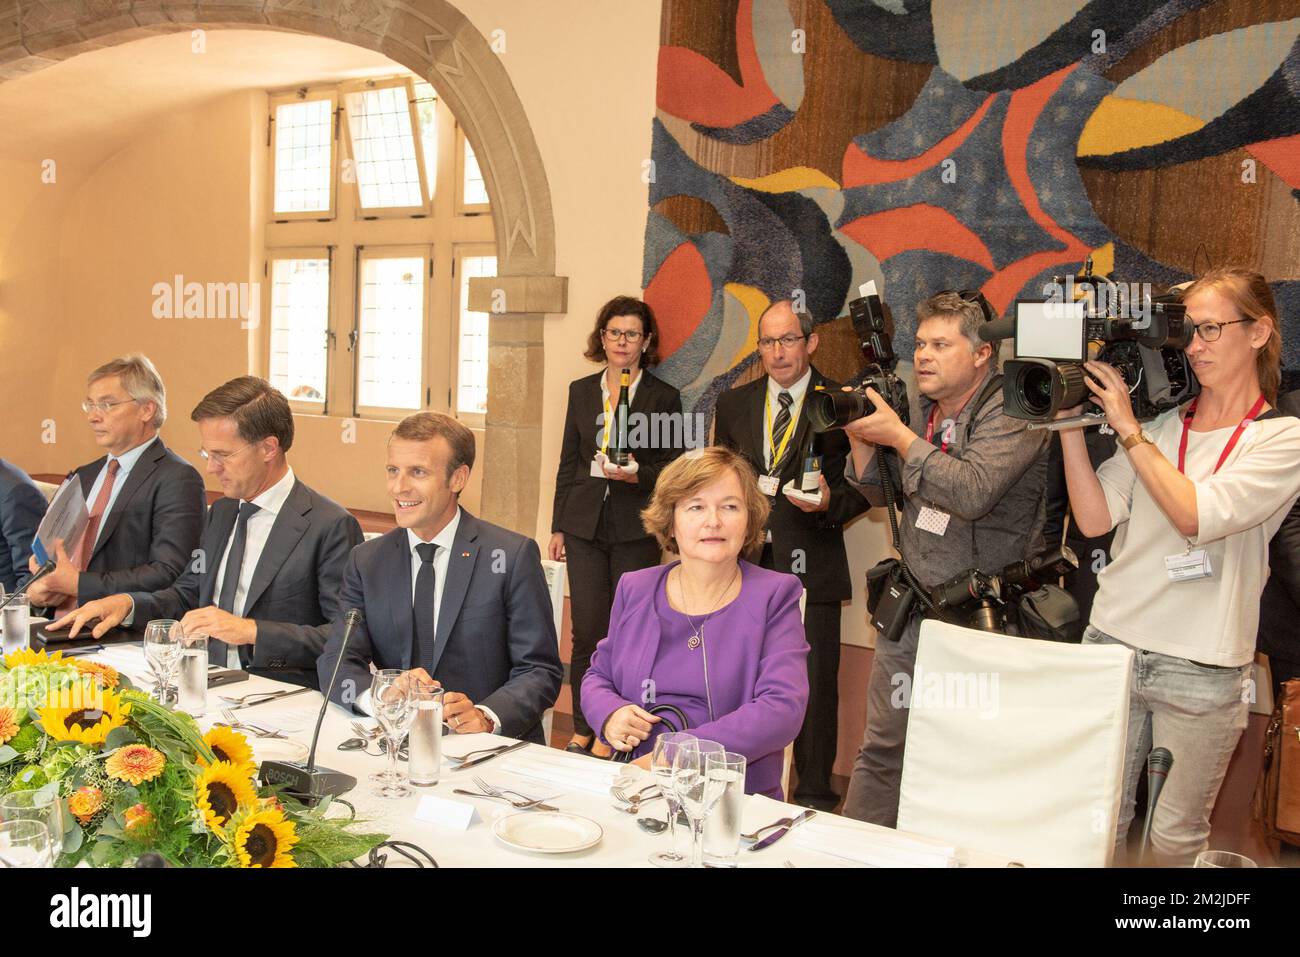 L-R, Dutch PM adviser for Europe, Michael Stibbe, Dutch Prime Minister Mark Rutte, French President Emmanuel Macron and French Minister for European Affairs, Nathalie Loiseau pictured at a working meeting between the government leaders of Luxembourg, Belgium, the Netherlands and France, Thursday 06 September 2018 in Bourglinster, the Grand Duchy of Luxembourg. BELGA PHOTO POOL SIP / CHARLES CARATINI  Stock Photo